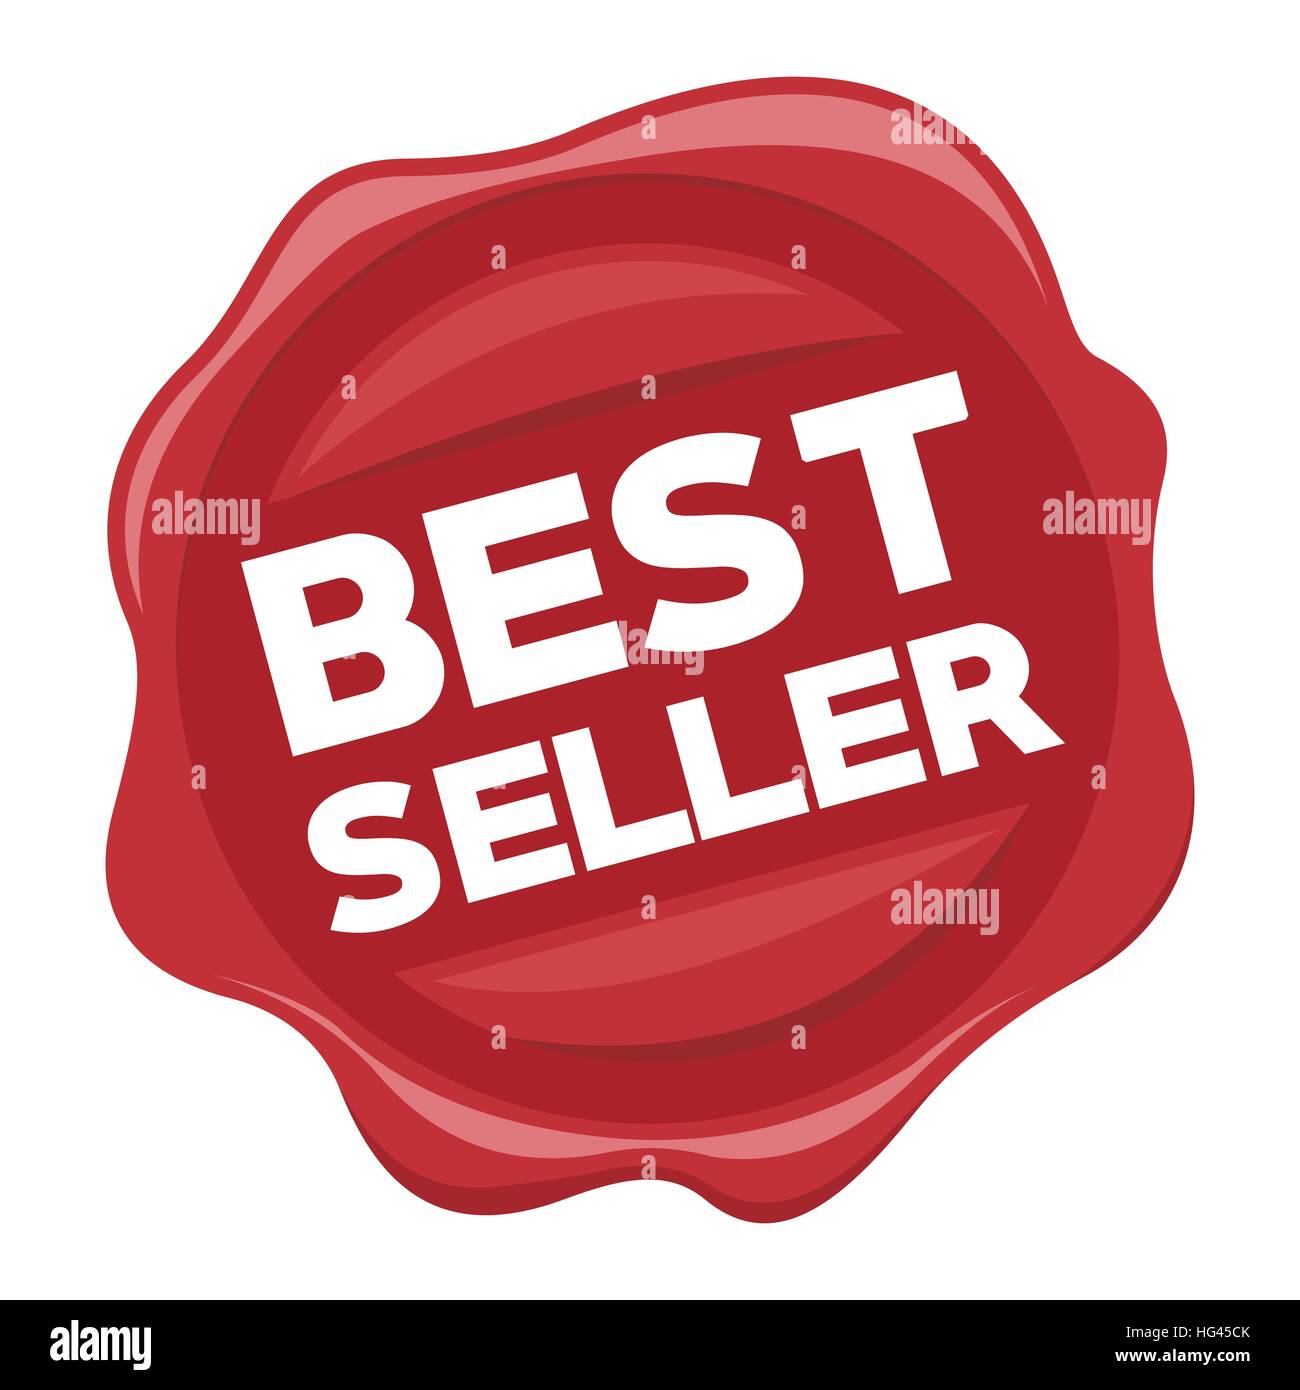 Top Seller Stamp Images – Browse 30 Stock Photos, Vectors, and